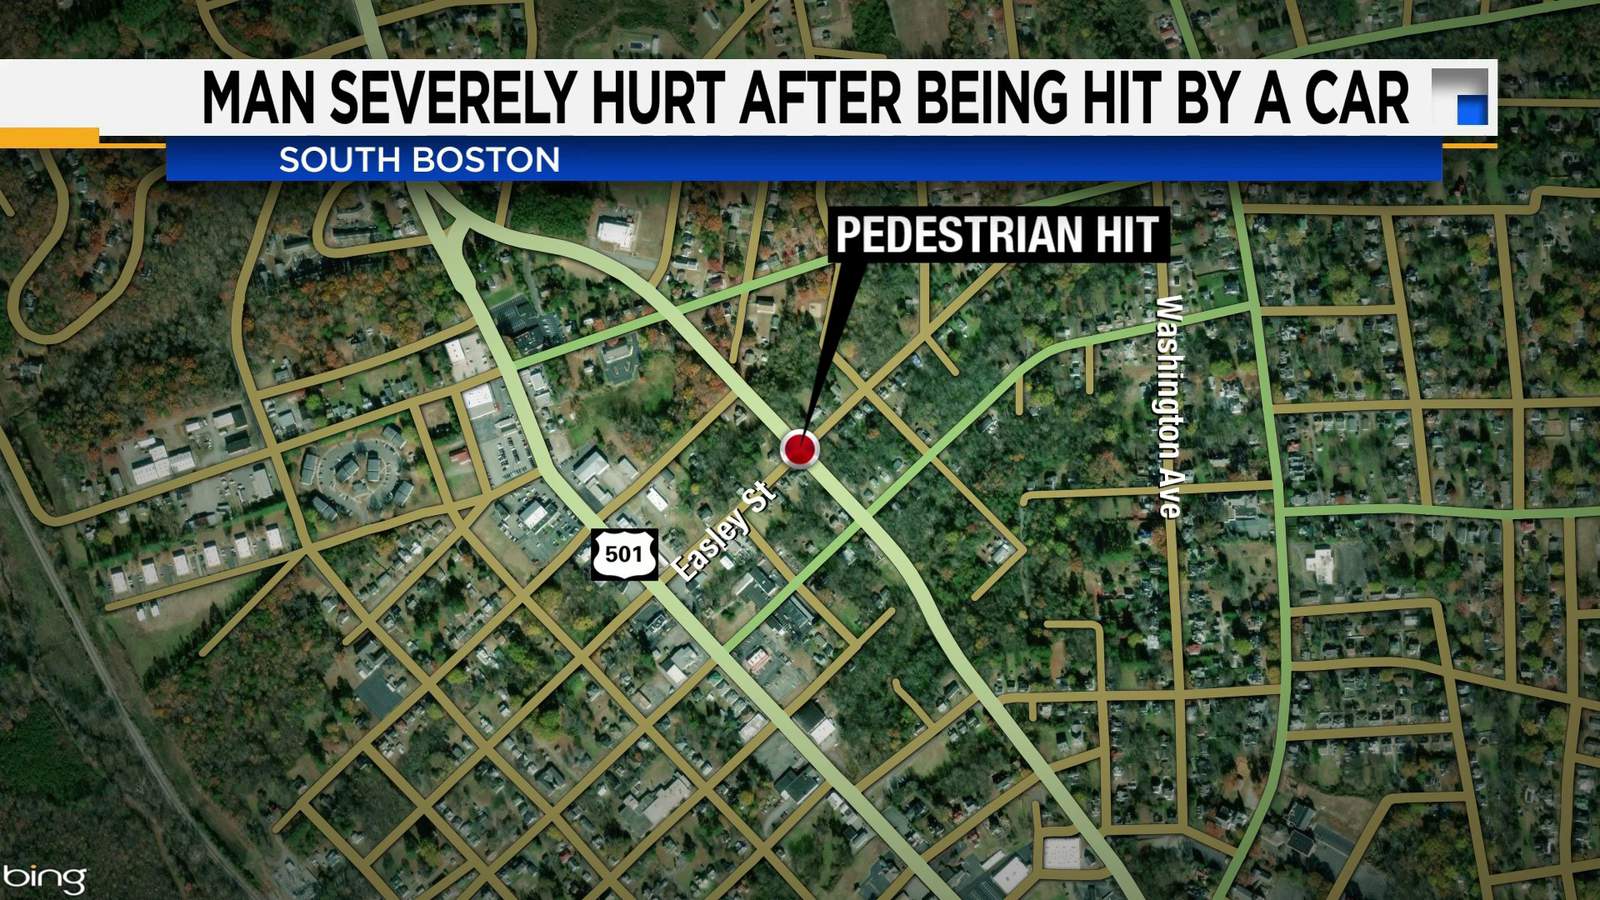 Man severely hurt after being hit by a car in South Boston Saturday night